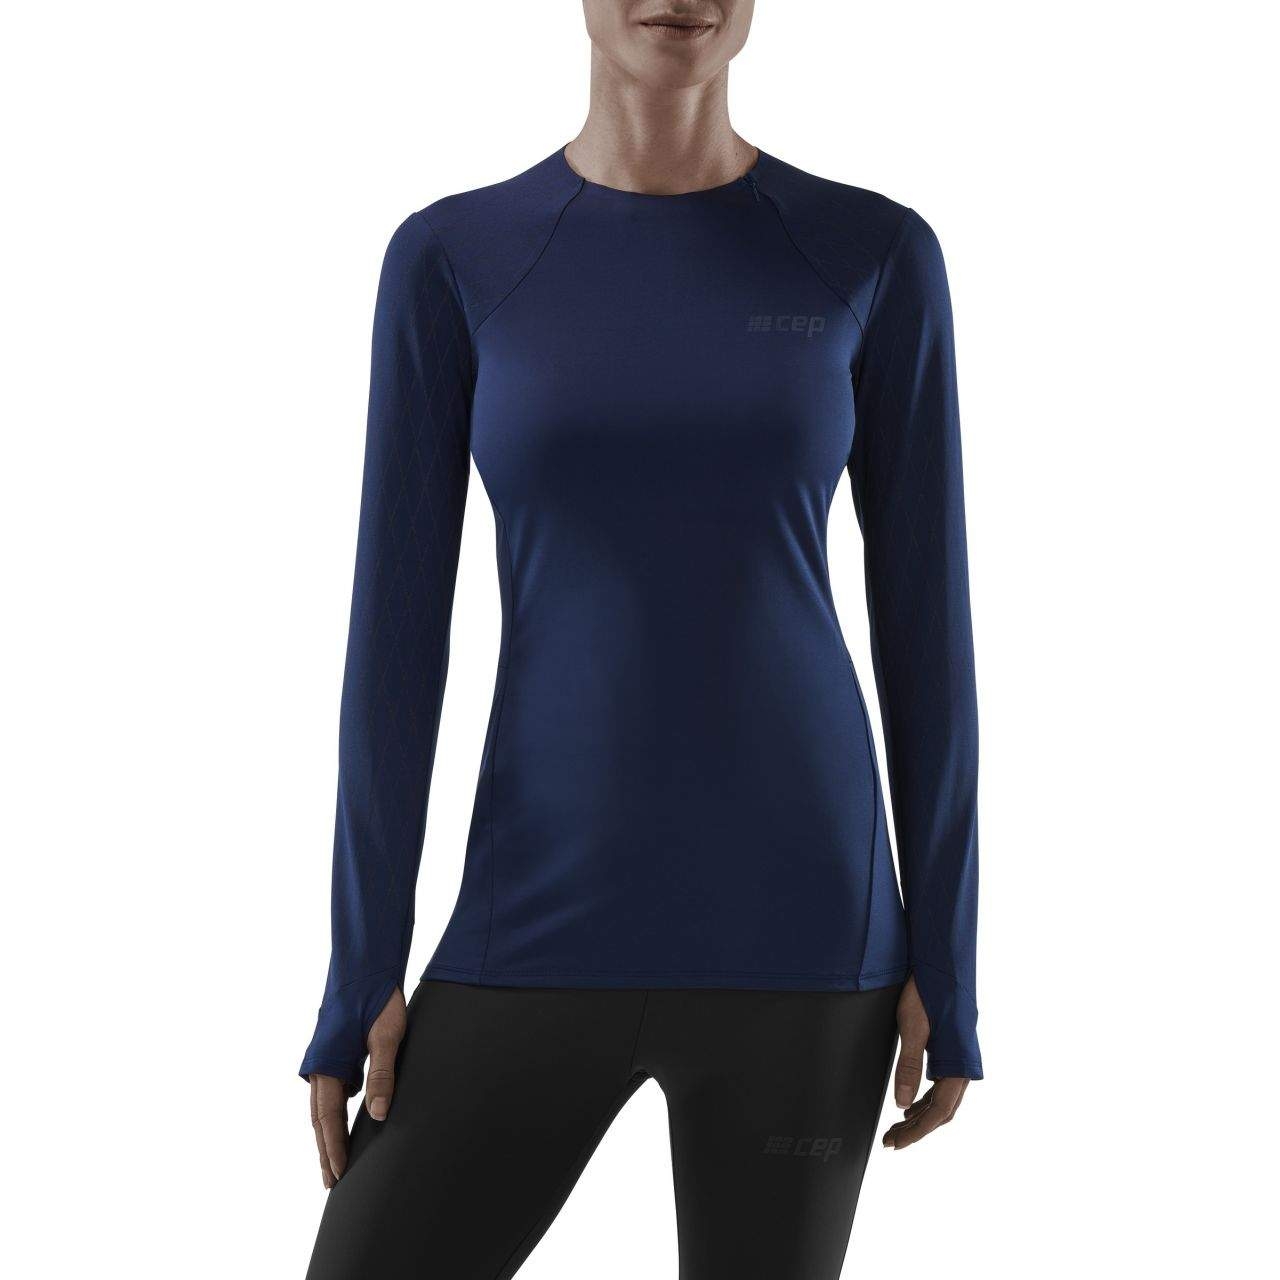 Image of CEP Cold Weather Longsleeve Shirt Women - navy